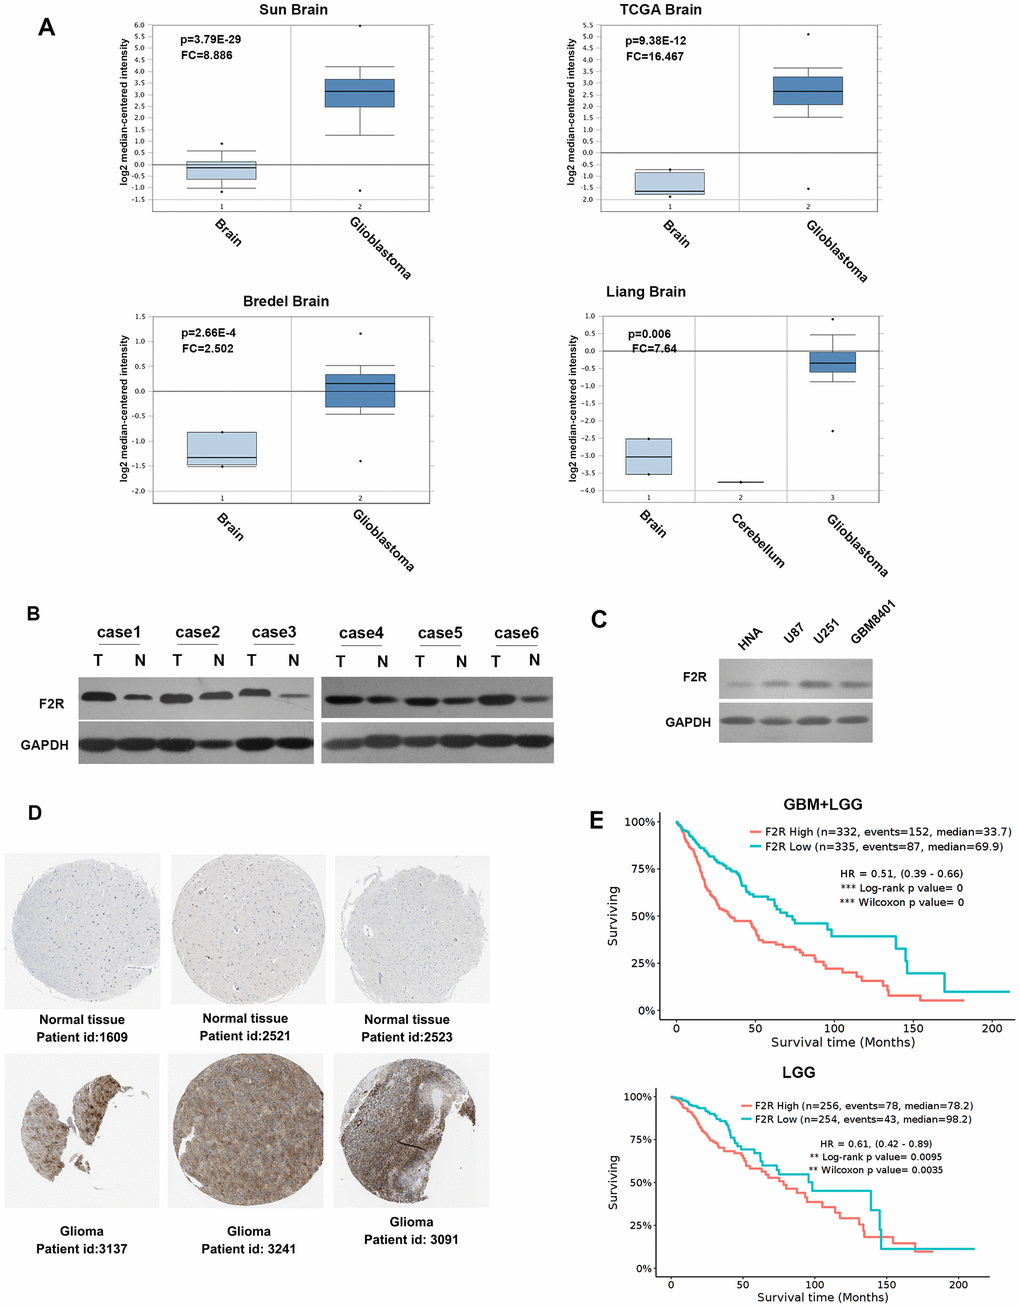 F2R is significantly upregulated in glioma and predicts poor survival. (A) Analysis of the expression pattern of F2R in normal brain and glioblastoma tissue, based on the Oncomine database of Sun, TCGA, Bredel and Liang glioblastoma datasets. (B) Western blotting detection of the F2R expression in 6 pairs of malignant glioma and normal tissues. (C) Western blotting detection of the F2R expression in normal human brain cells and three glioma cell lines. (D) The expression of F2R in normal tissue and malignant glioma tissues using the Human Protein Atlas database. (E) F2R was significantly associated with overall survival in glioma patients, using a Kaplan–Meier curve and a log-rank test. GBM, Glioblastoma multiforme; LGG, Brain Lower Grade Glioma. Data are presented as the mean ± SEM.